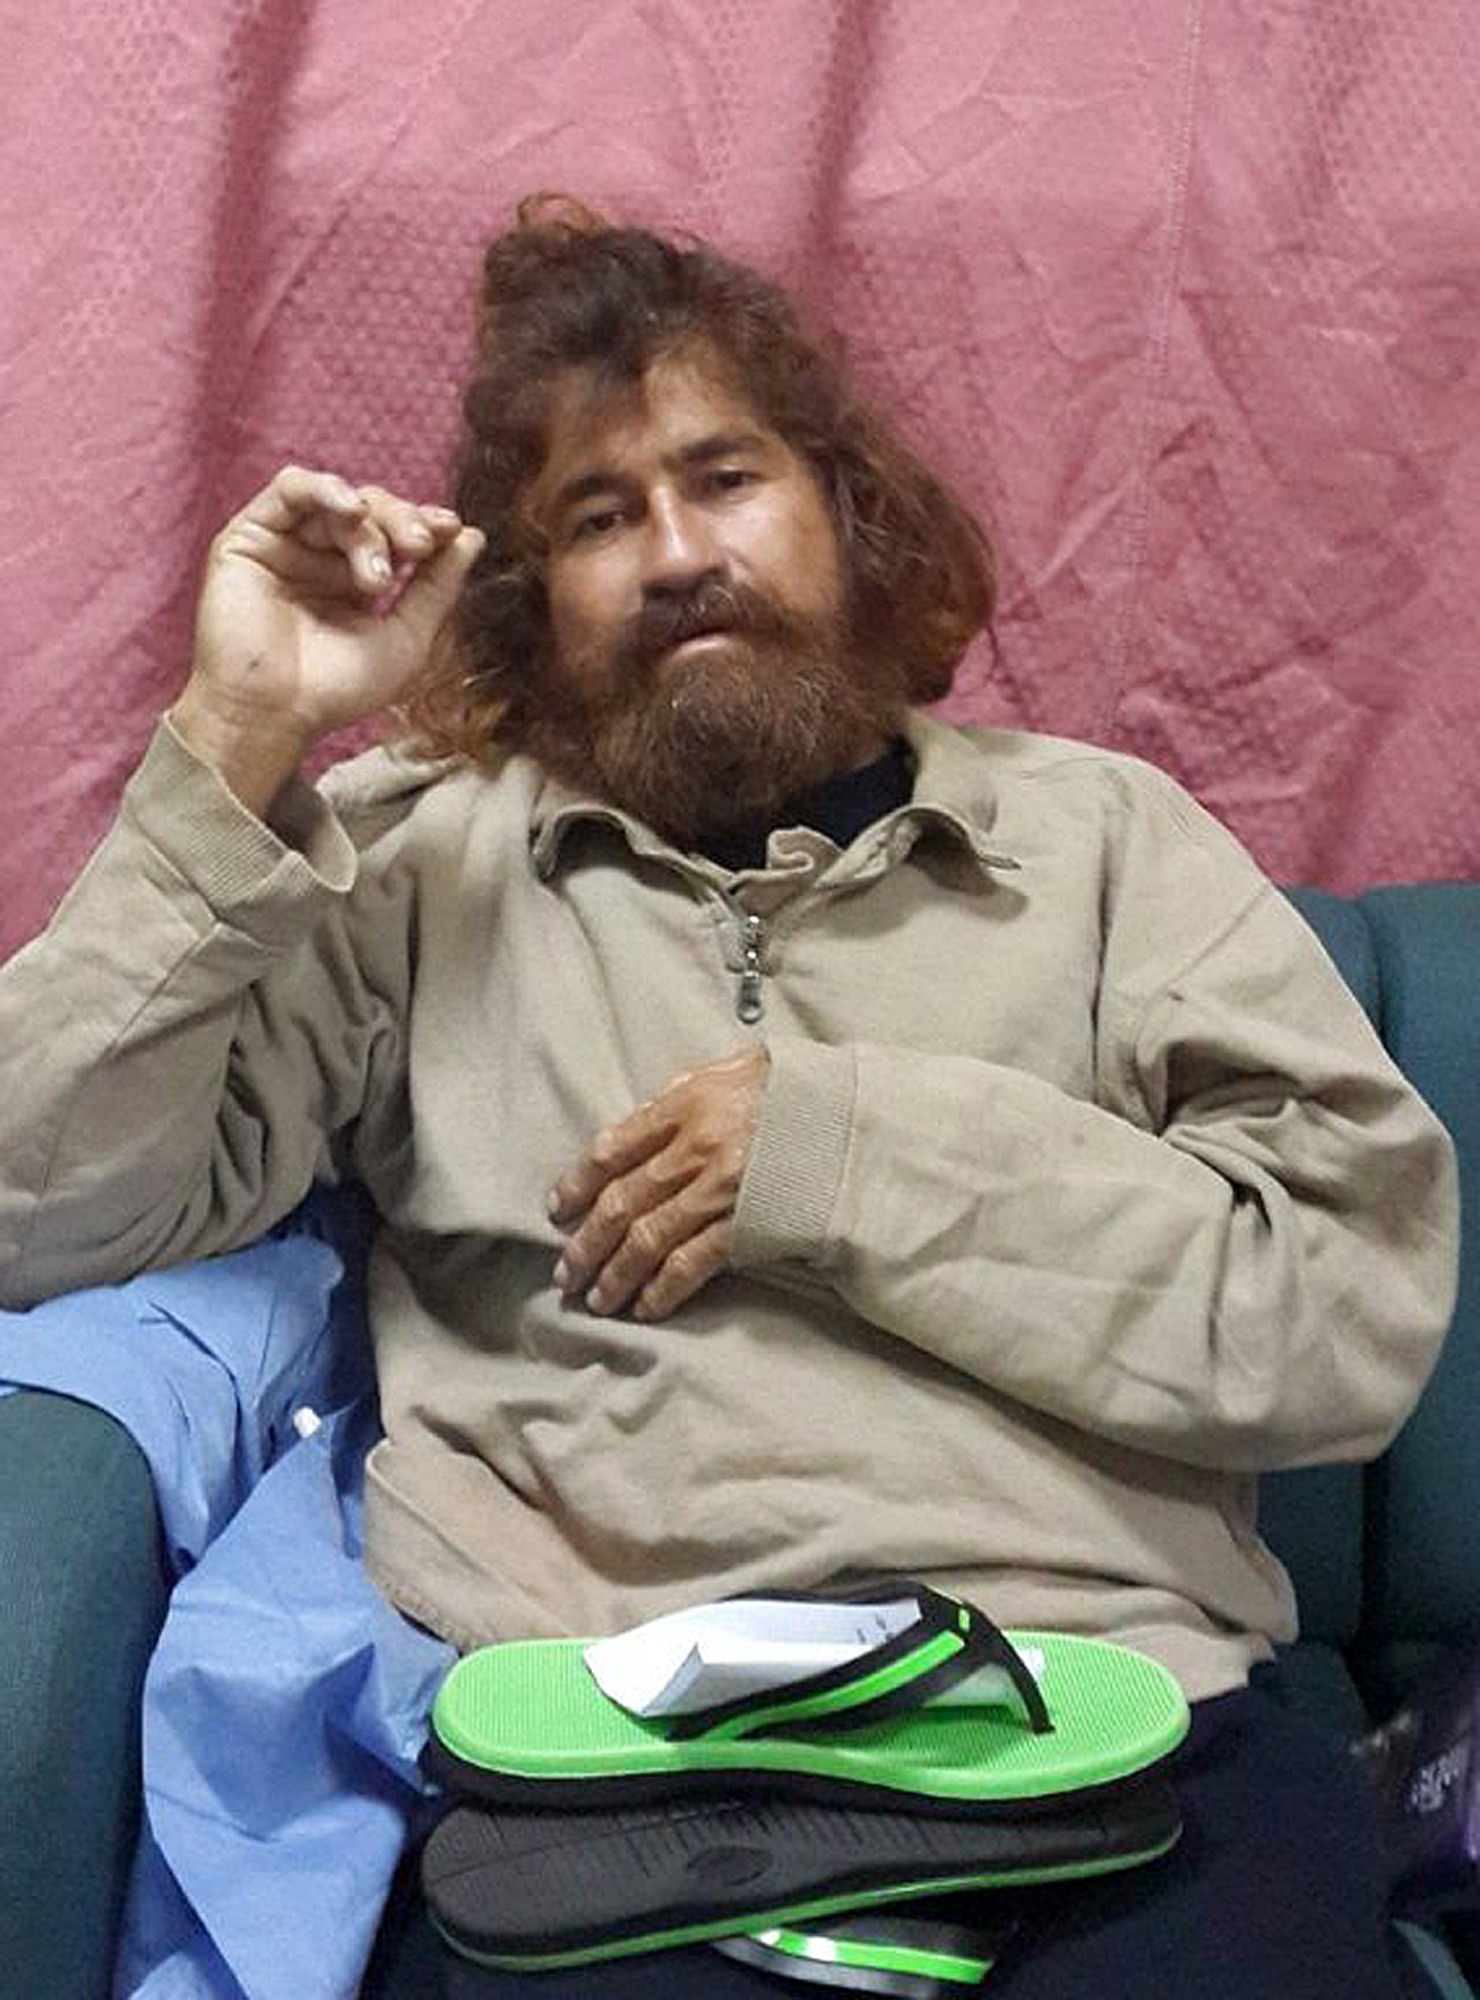 A fisherman who managed to survive 15 months lost at sea is being sued for US$1 million by the family of his dead colleague, who are accusing him of committing cannibalism with their son.